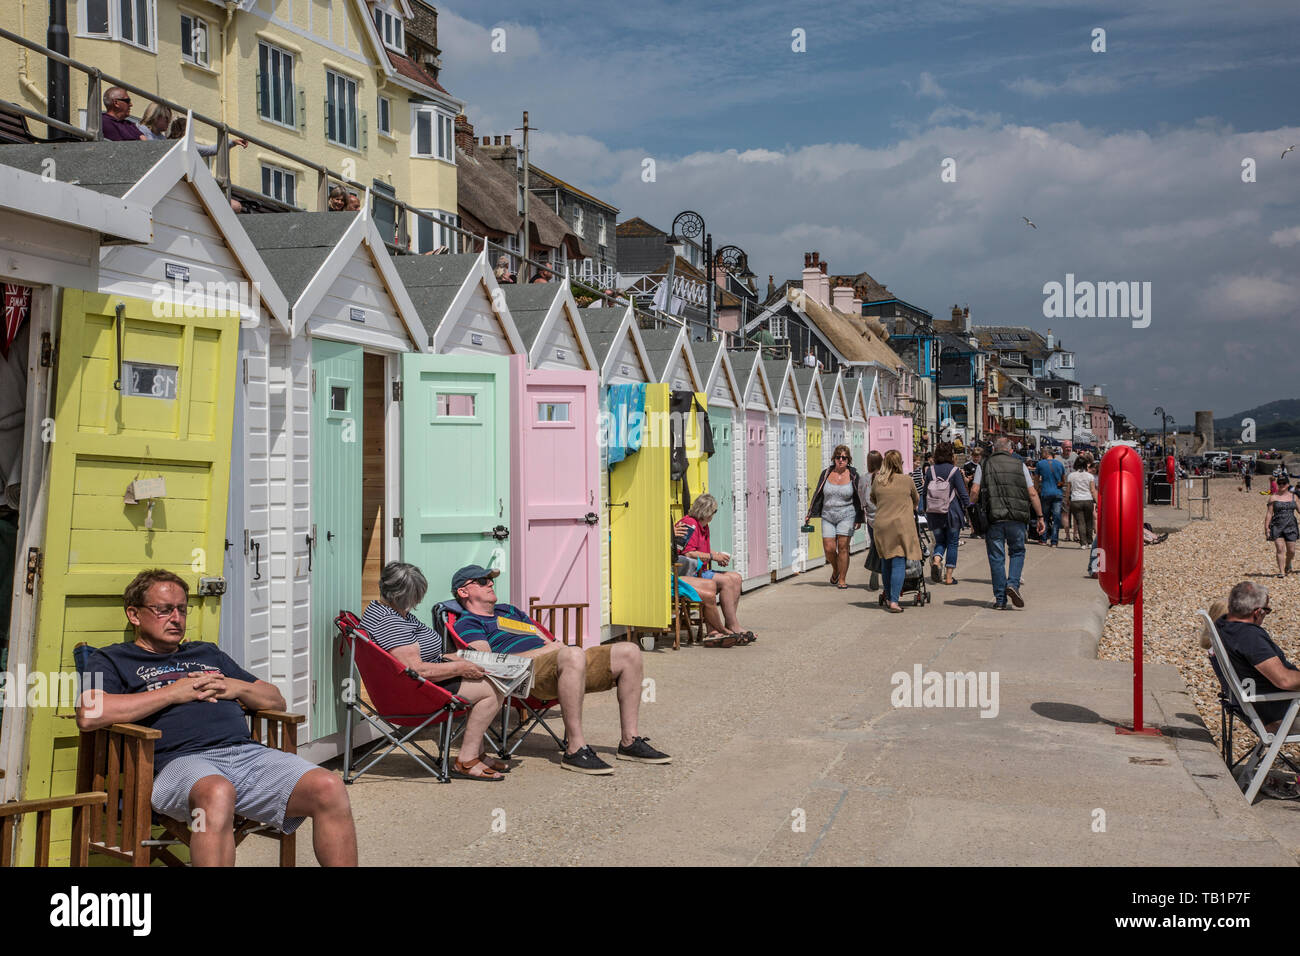 Lyme Regis, seaside town on the Jurassic Coastline set between the counties of West Dorset and East Devon, England, United Kingdom Stock Photo